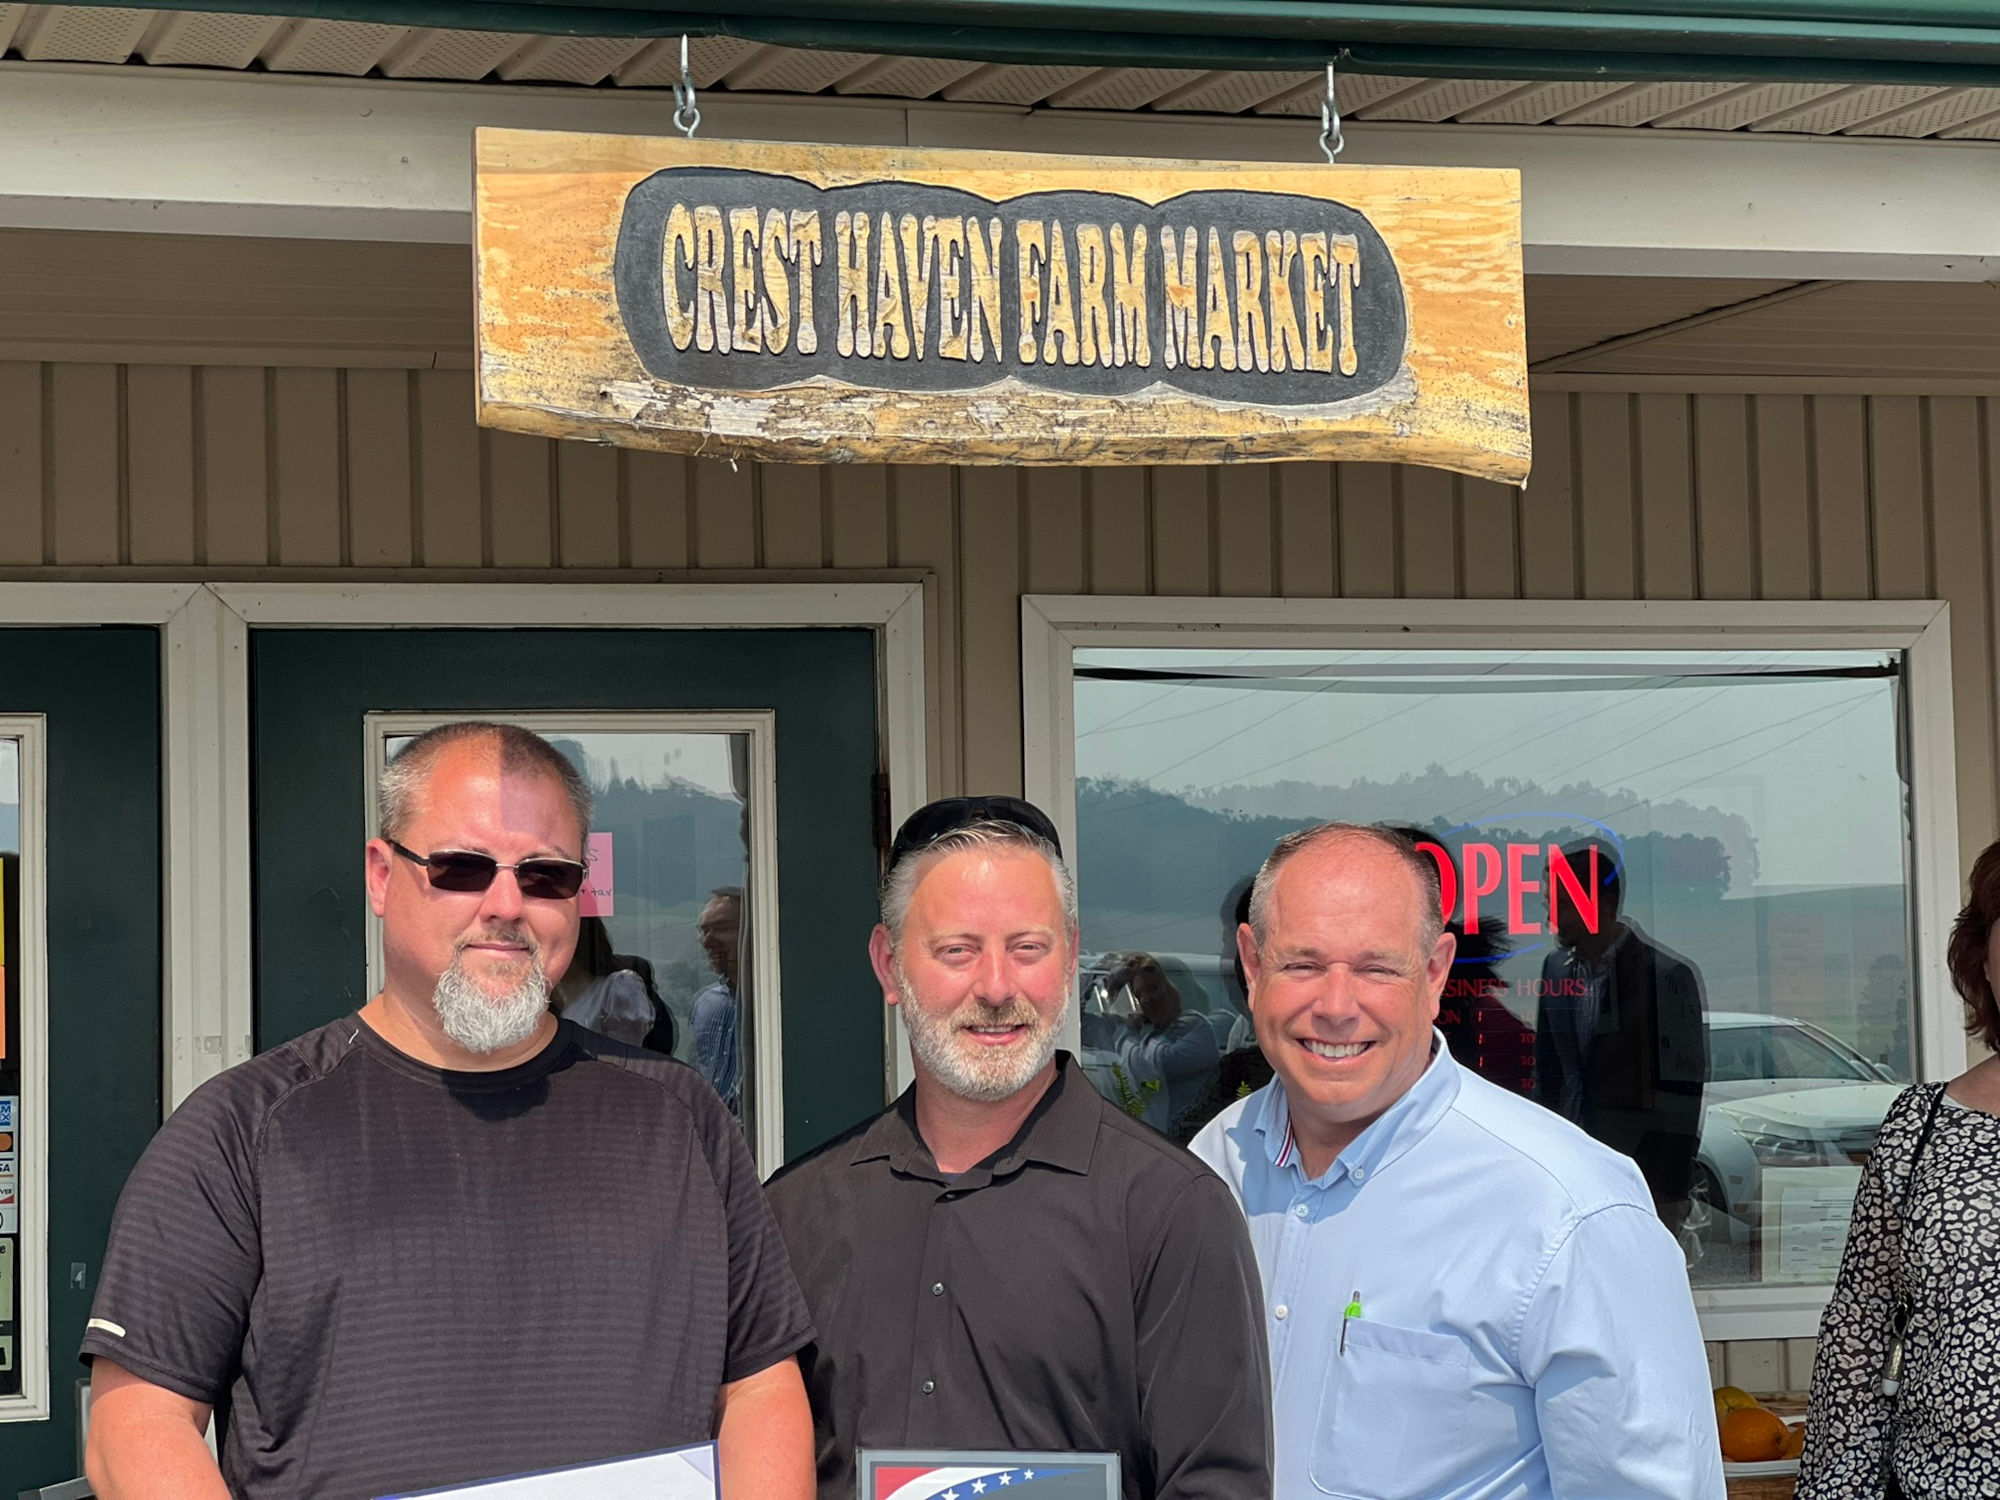 Crest Haven Farm Market: A Local Success Story of Growth and Community Spirit